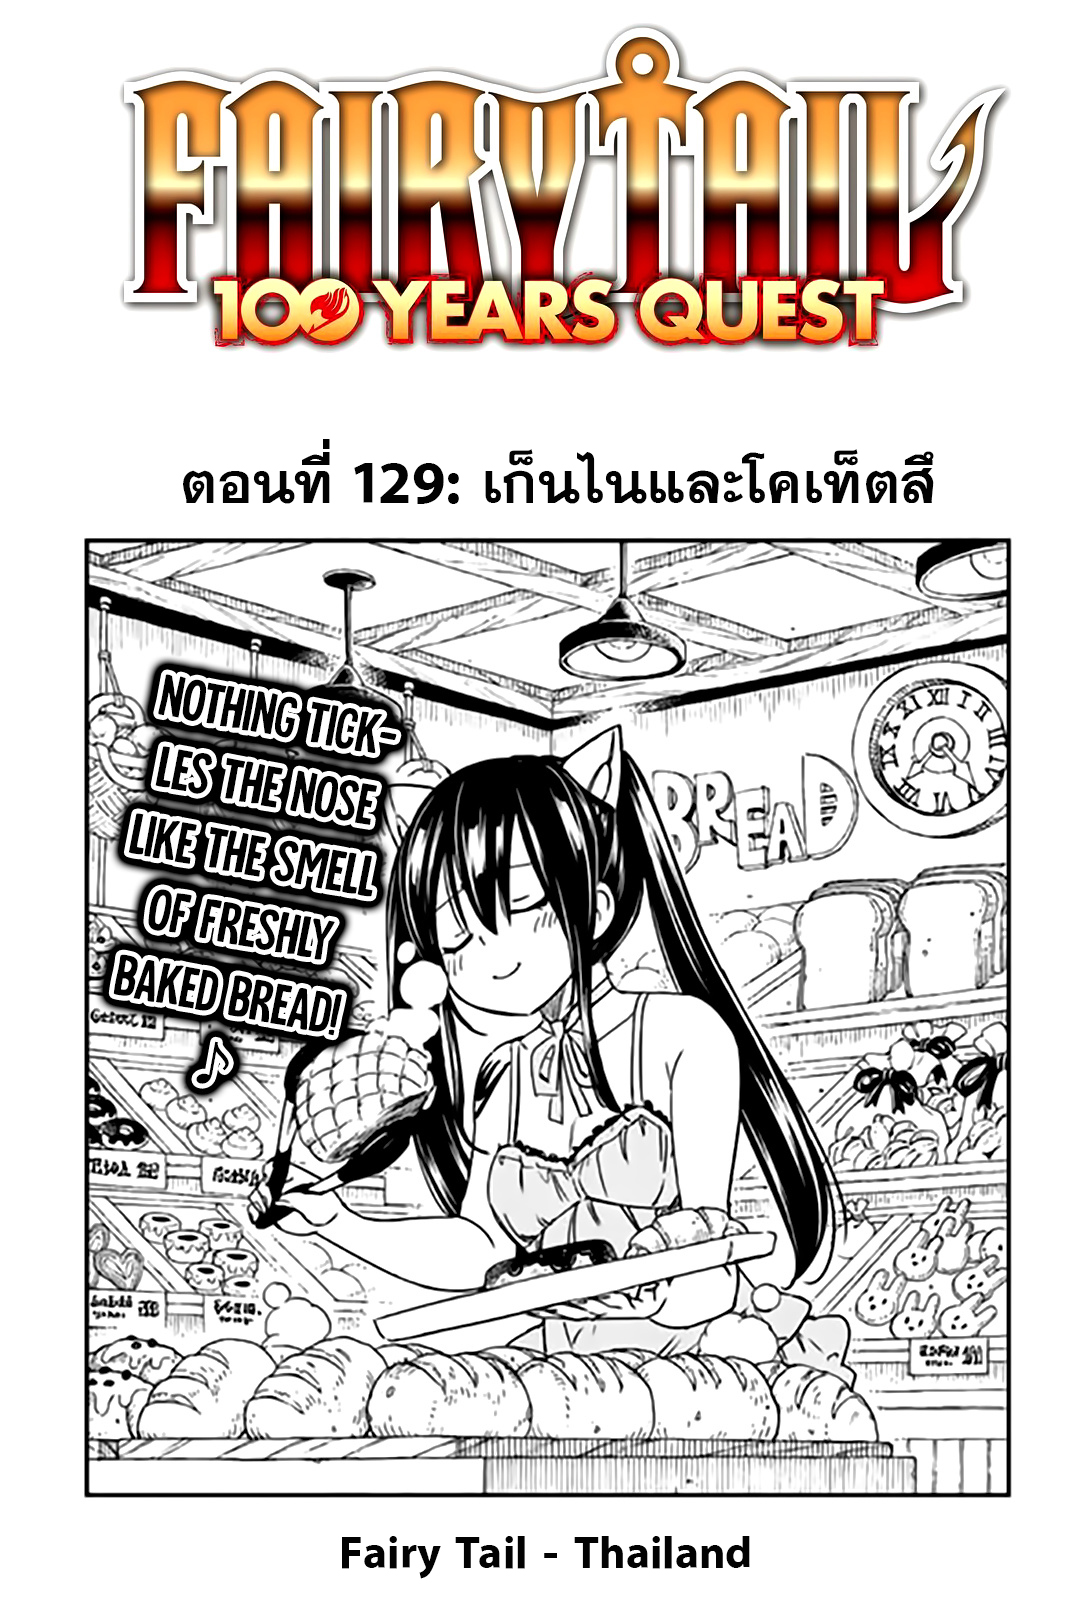 Fairy Tail 100 Years Quest 129 (1)